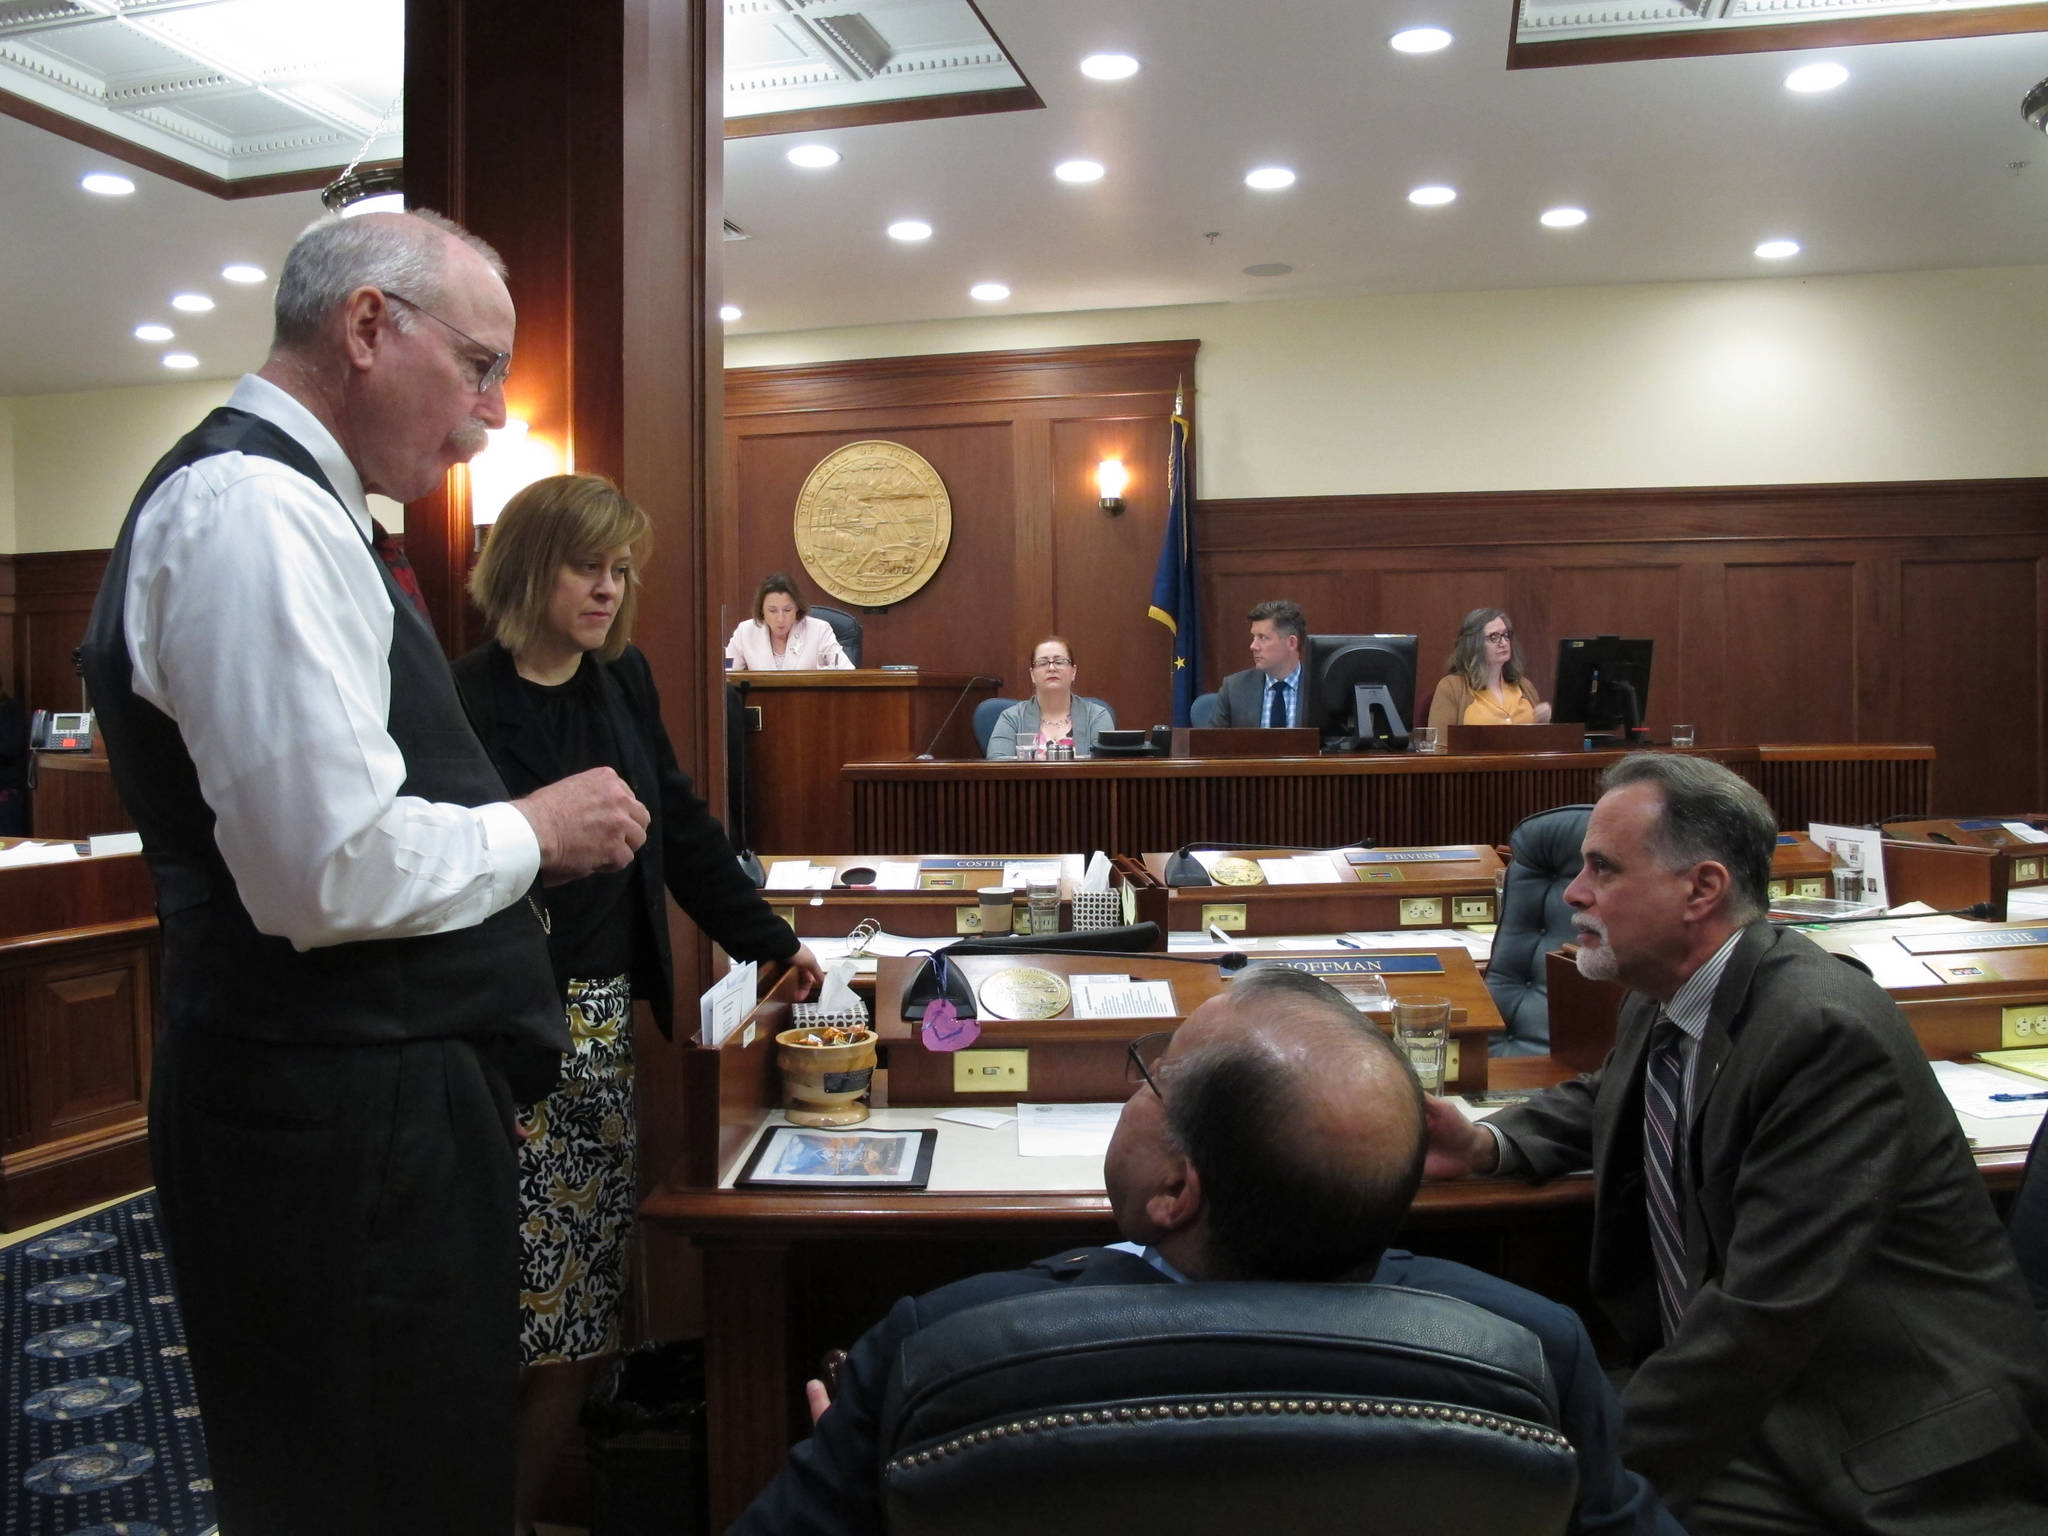 From left, Alaska Sens. Bert Stedman, Mia Costello, Lyman Hoffman and Peter Micciche speak during a break on the Senate floor on Tuesday, June 4, 2019, in Juneau, Alaska. The Senate on Tuesday failed to pass a bill that would have paid a full dividend from Alaska’s oil-wealth fund, the Alaska Permanent Fund, this year. (AP Photo/Becky Bohrer)